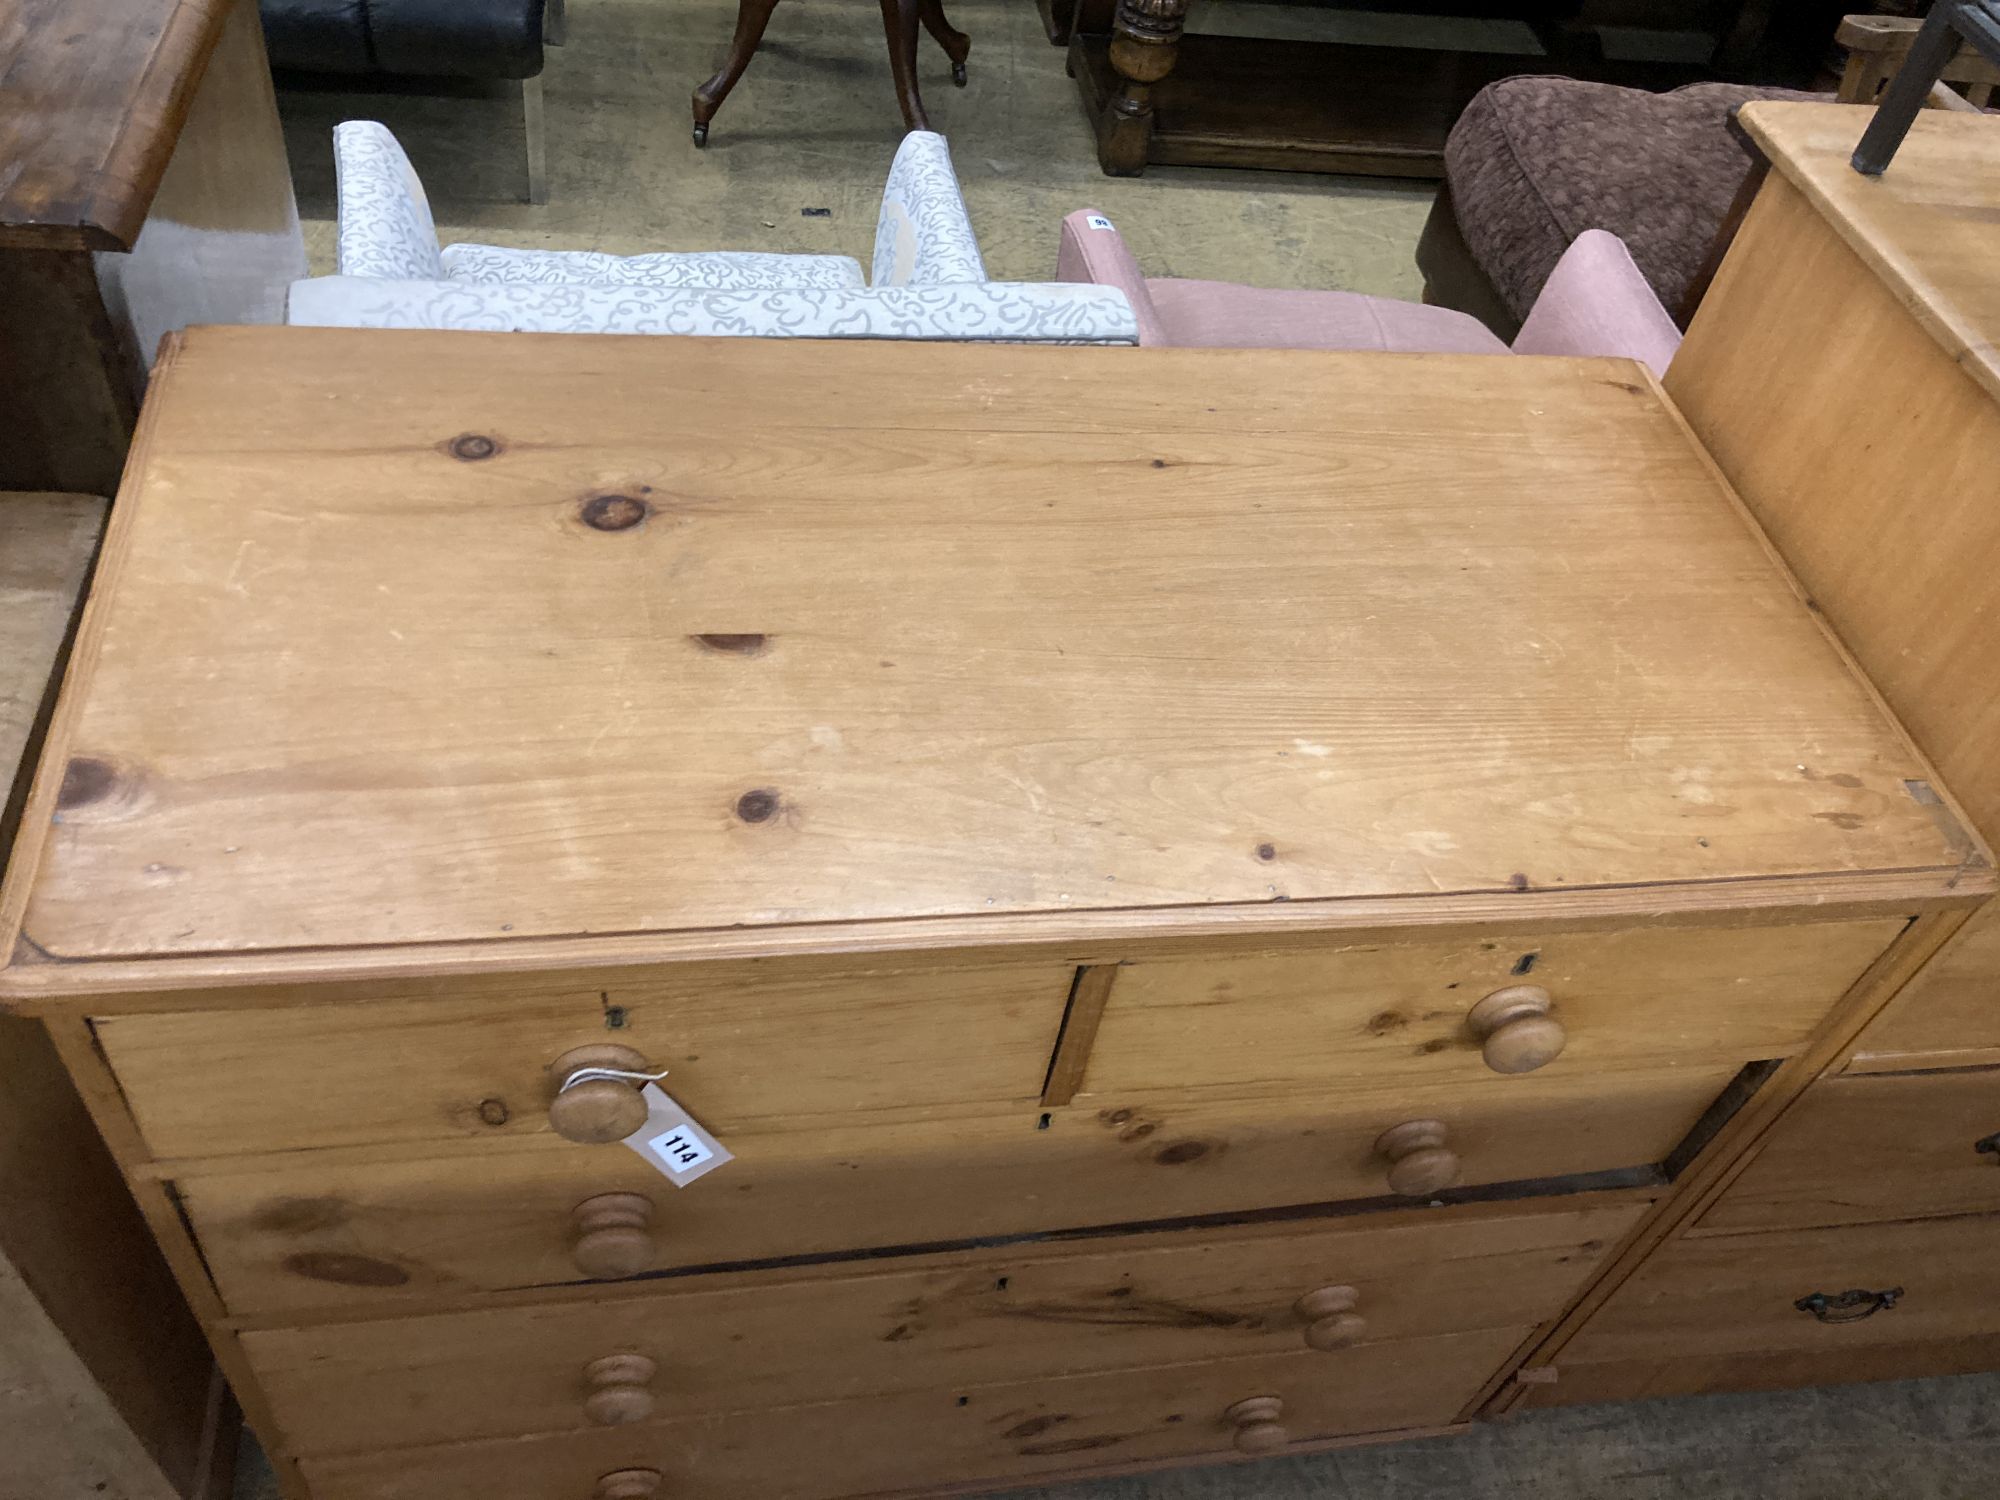 A Victorian pine chest of drawers, width 101cm, depth 48cm, height 87cm